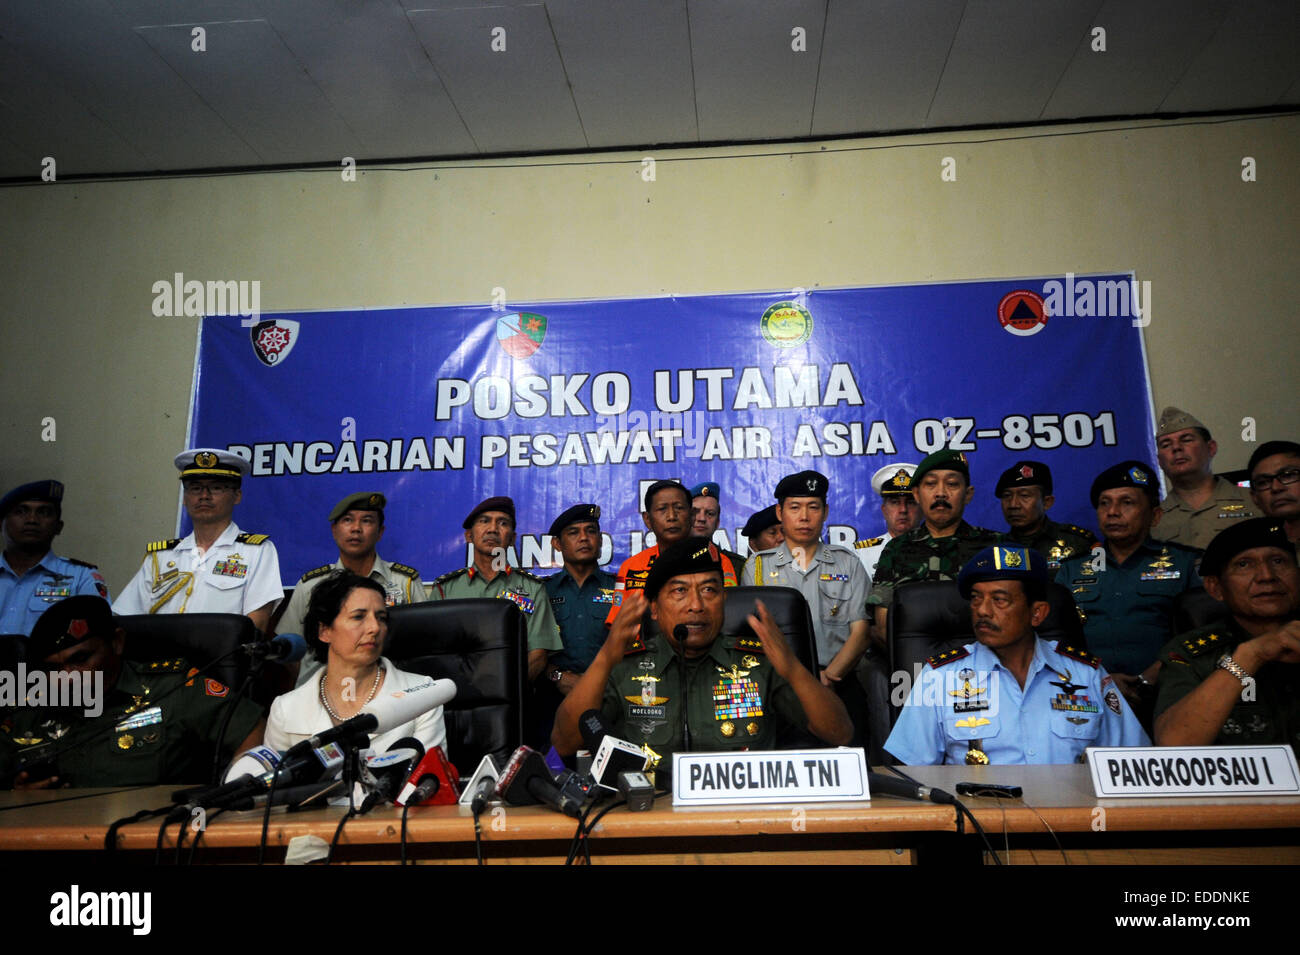 Pangkalan Bun, Indonesia. 6th Jan, 2015. Indonesian Military Commander General Moeldoko (C) attends a press conference after joining in the search of Airasia QZ 8501 victims in Pangkalan Bun, Indonesia, Jan. 6, 2015. The search operation for AirAsia Flight QZ8501 will spread slightly eastward on Tuesday as the weather and currents drag wreckage in that direction, the head of Indonesia's rescue agency said. Credit:  Agung Kuncahya B./Xinhua/Alamy Live News Stock Photo